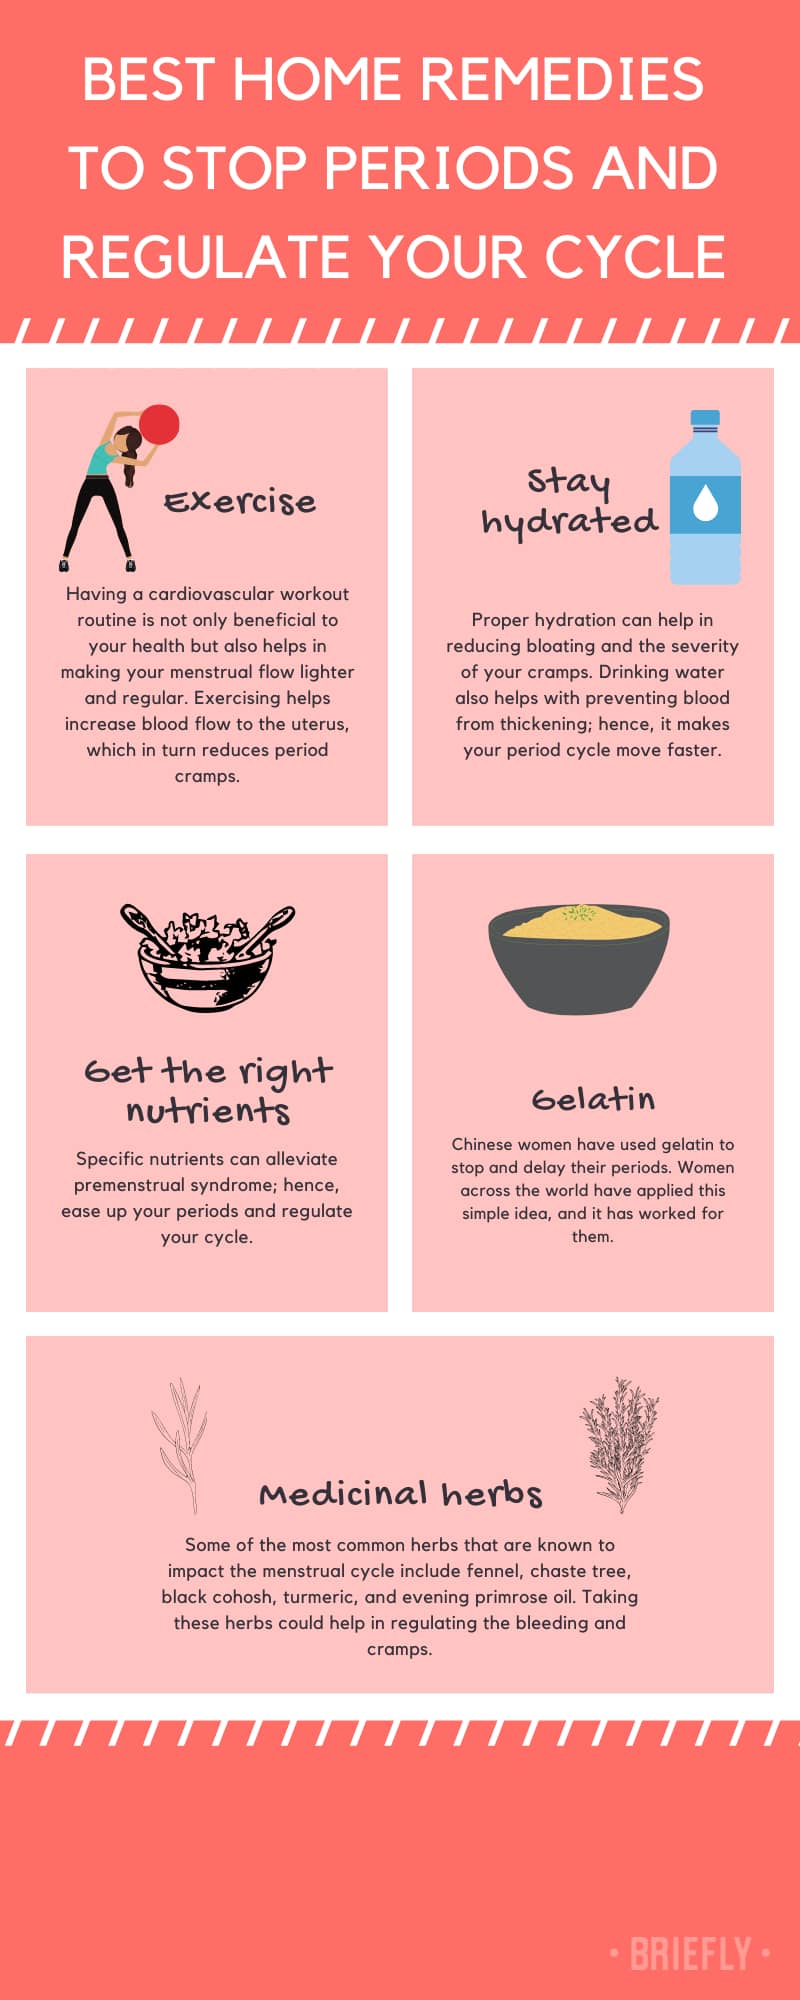 Best home remedies to stop periods